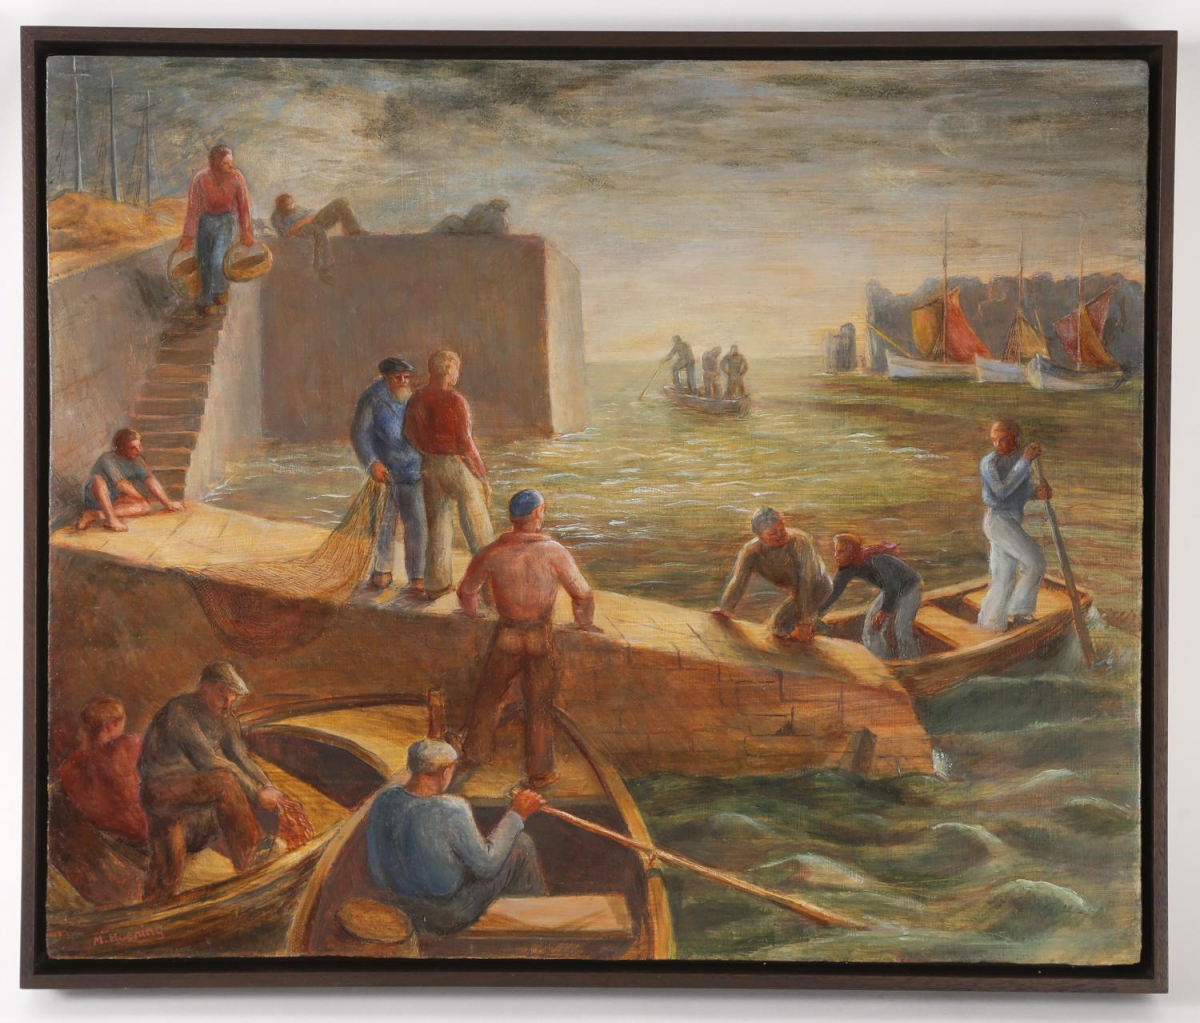 Workers at Harbor